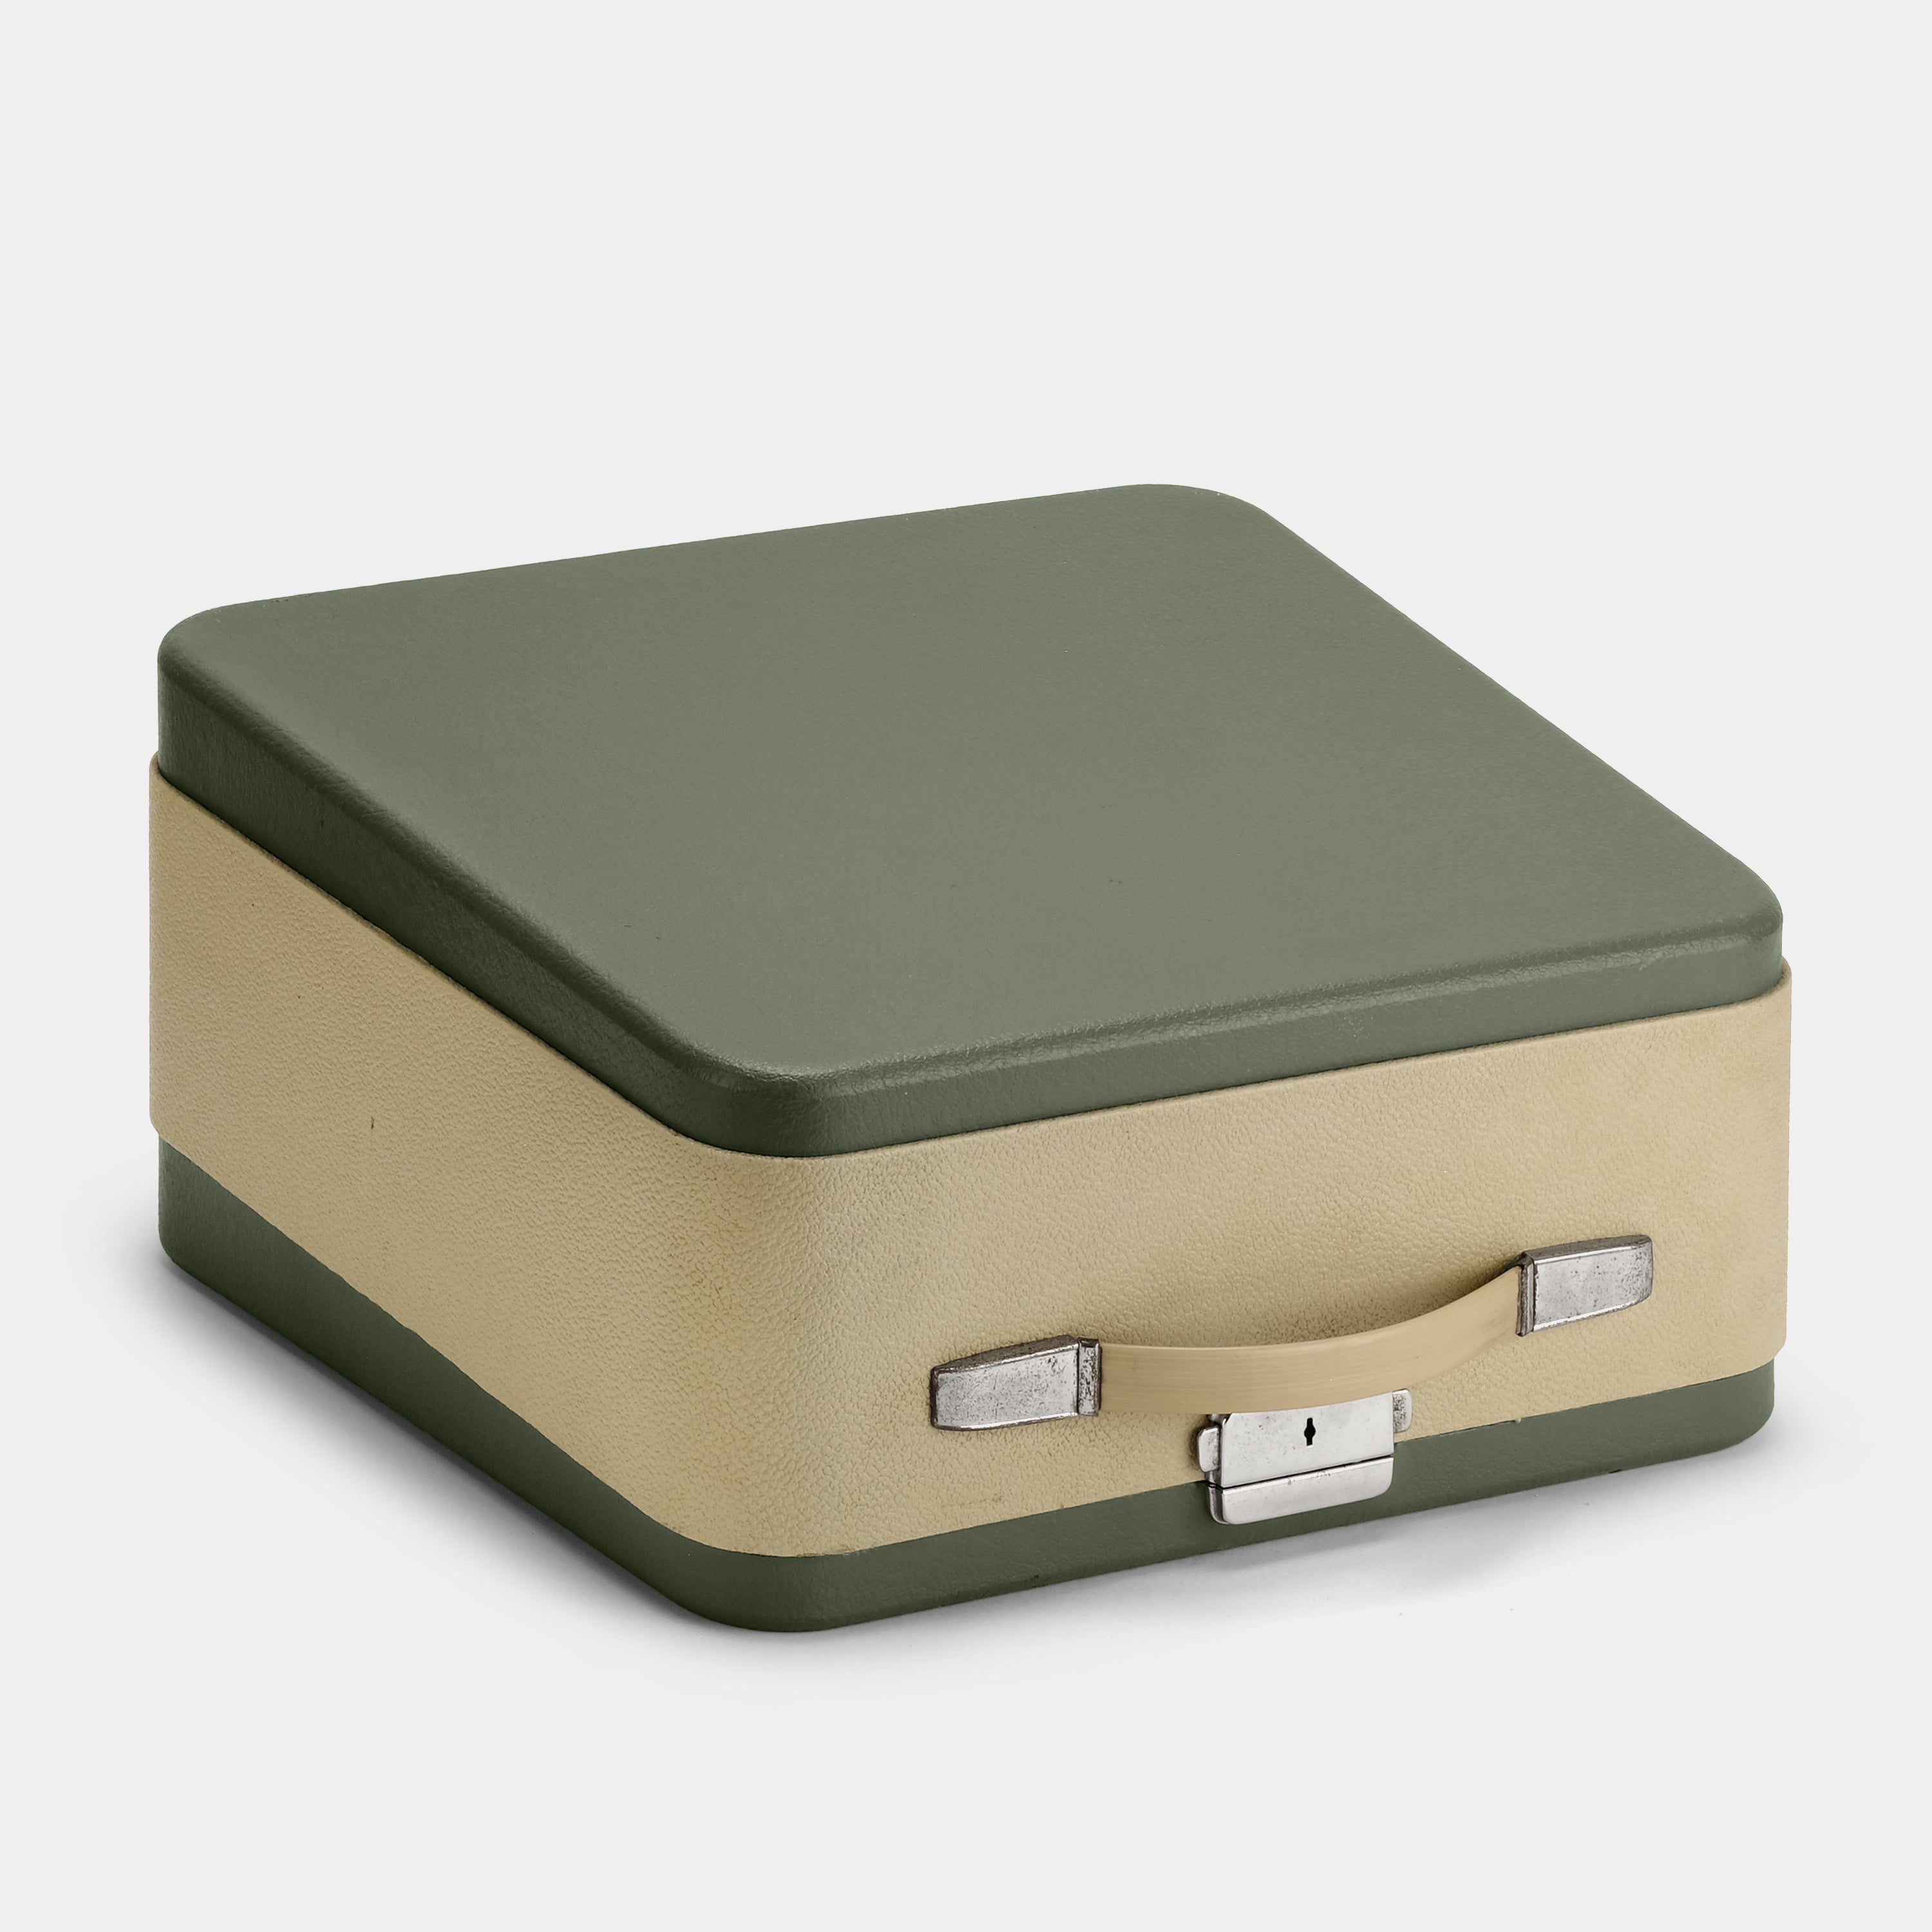 Olympia Beige and Green Manual Cursive Typewriter and Case